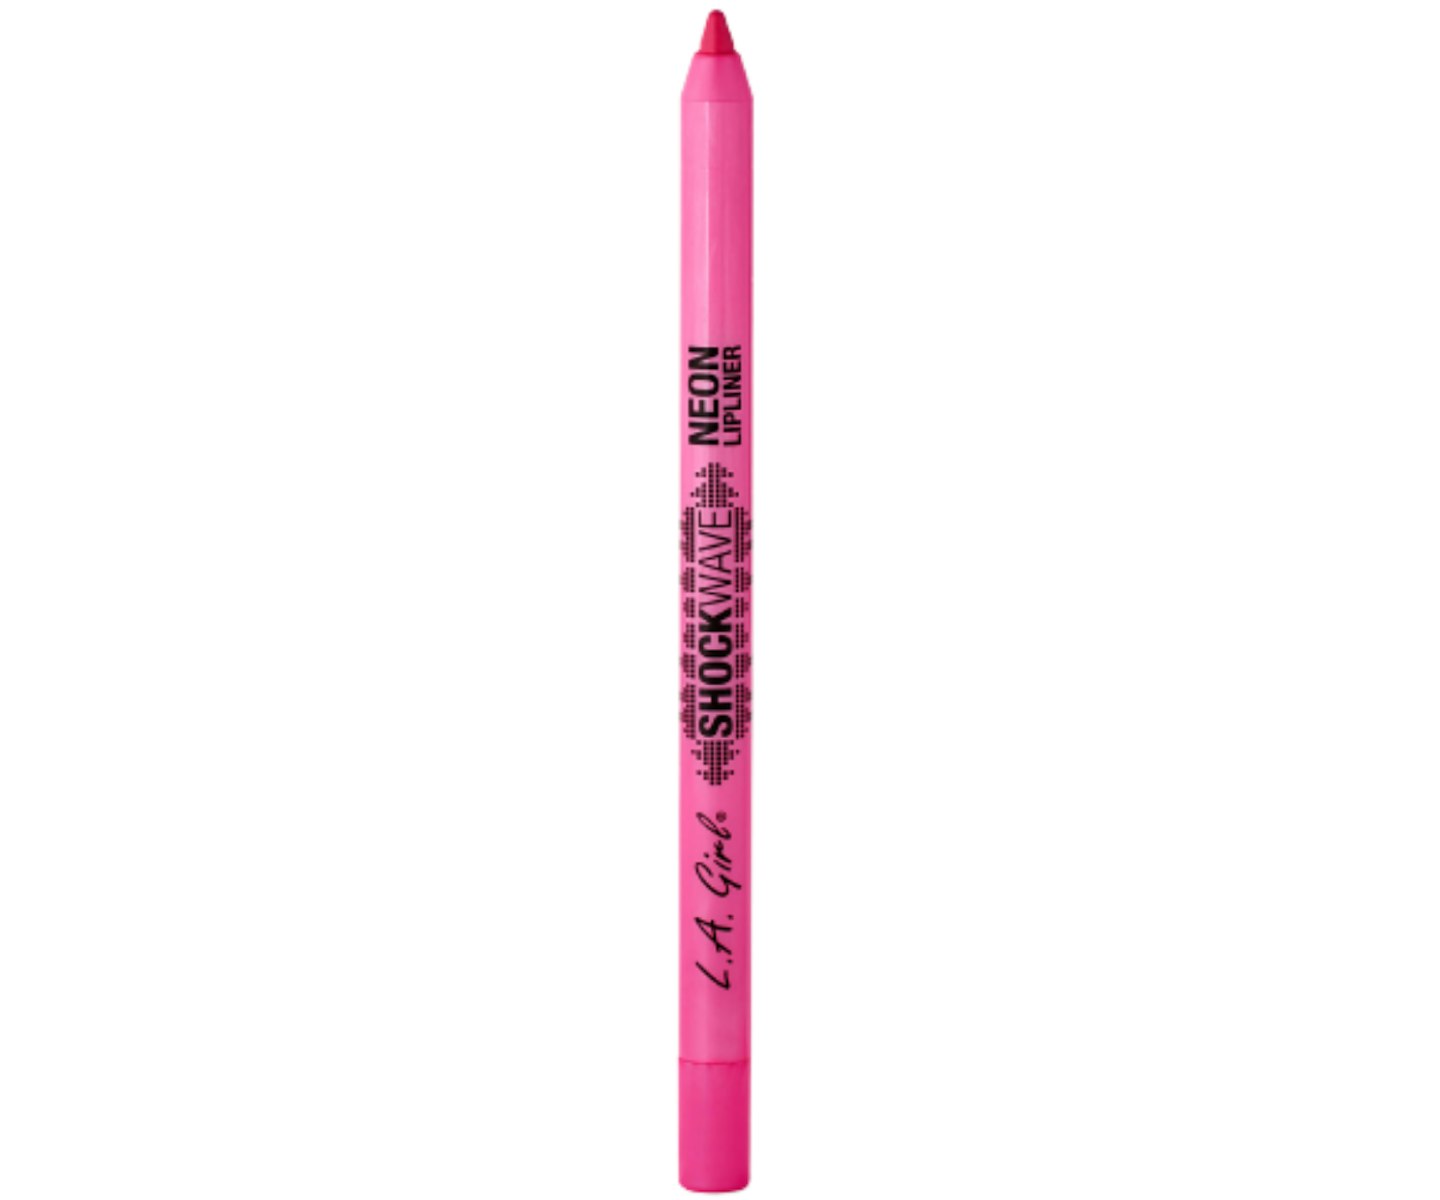 A picture of the L.A. Girl Shockwave Neon Lip Liner in the shade Pop